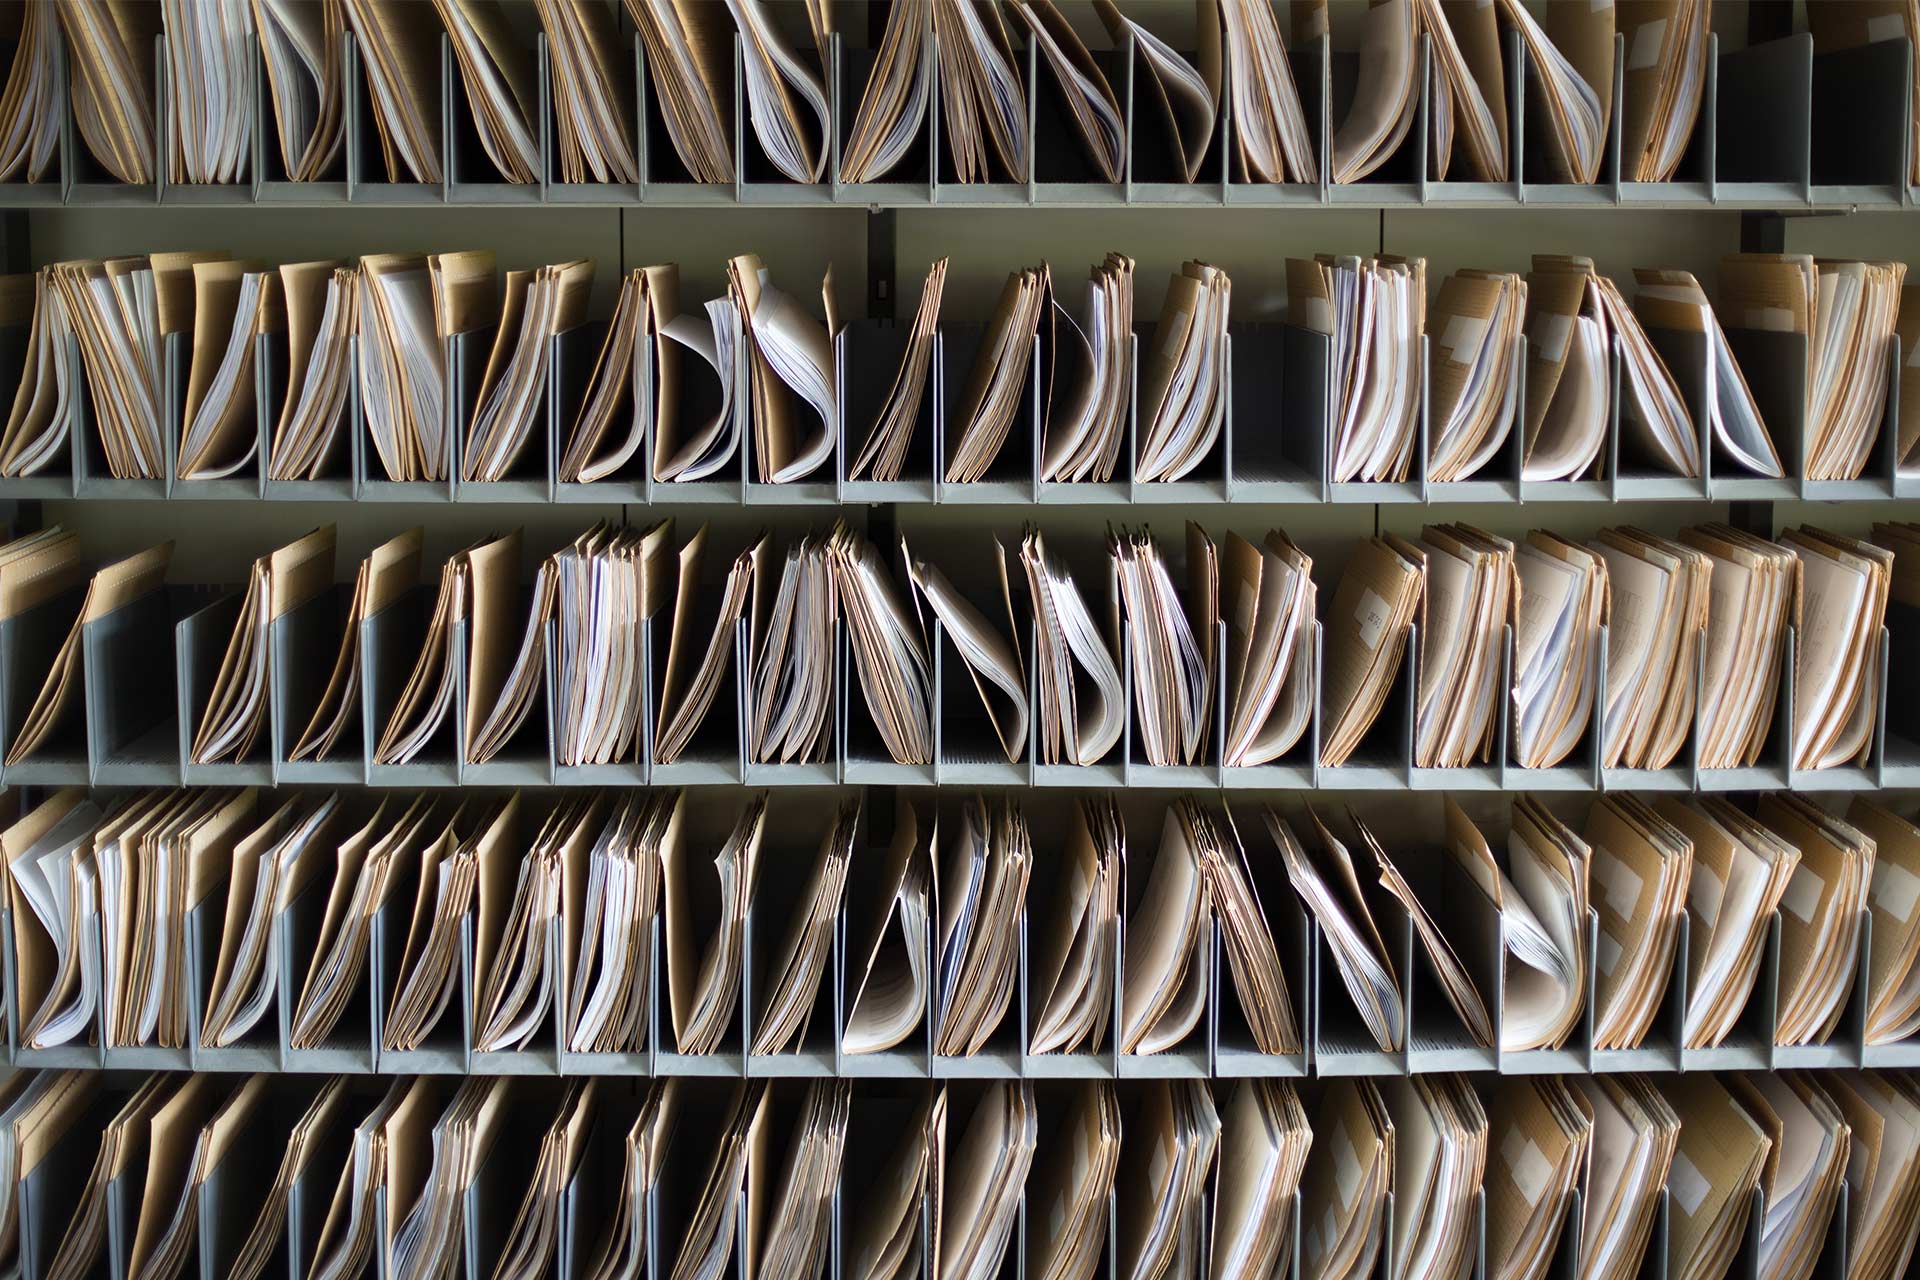 Rows of paper documents in folders organized into compartments.